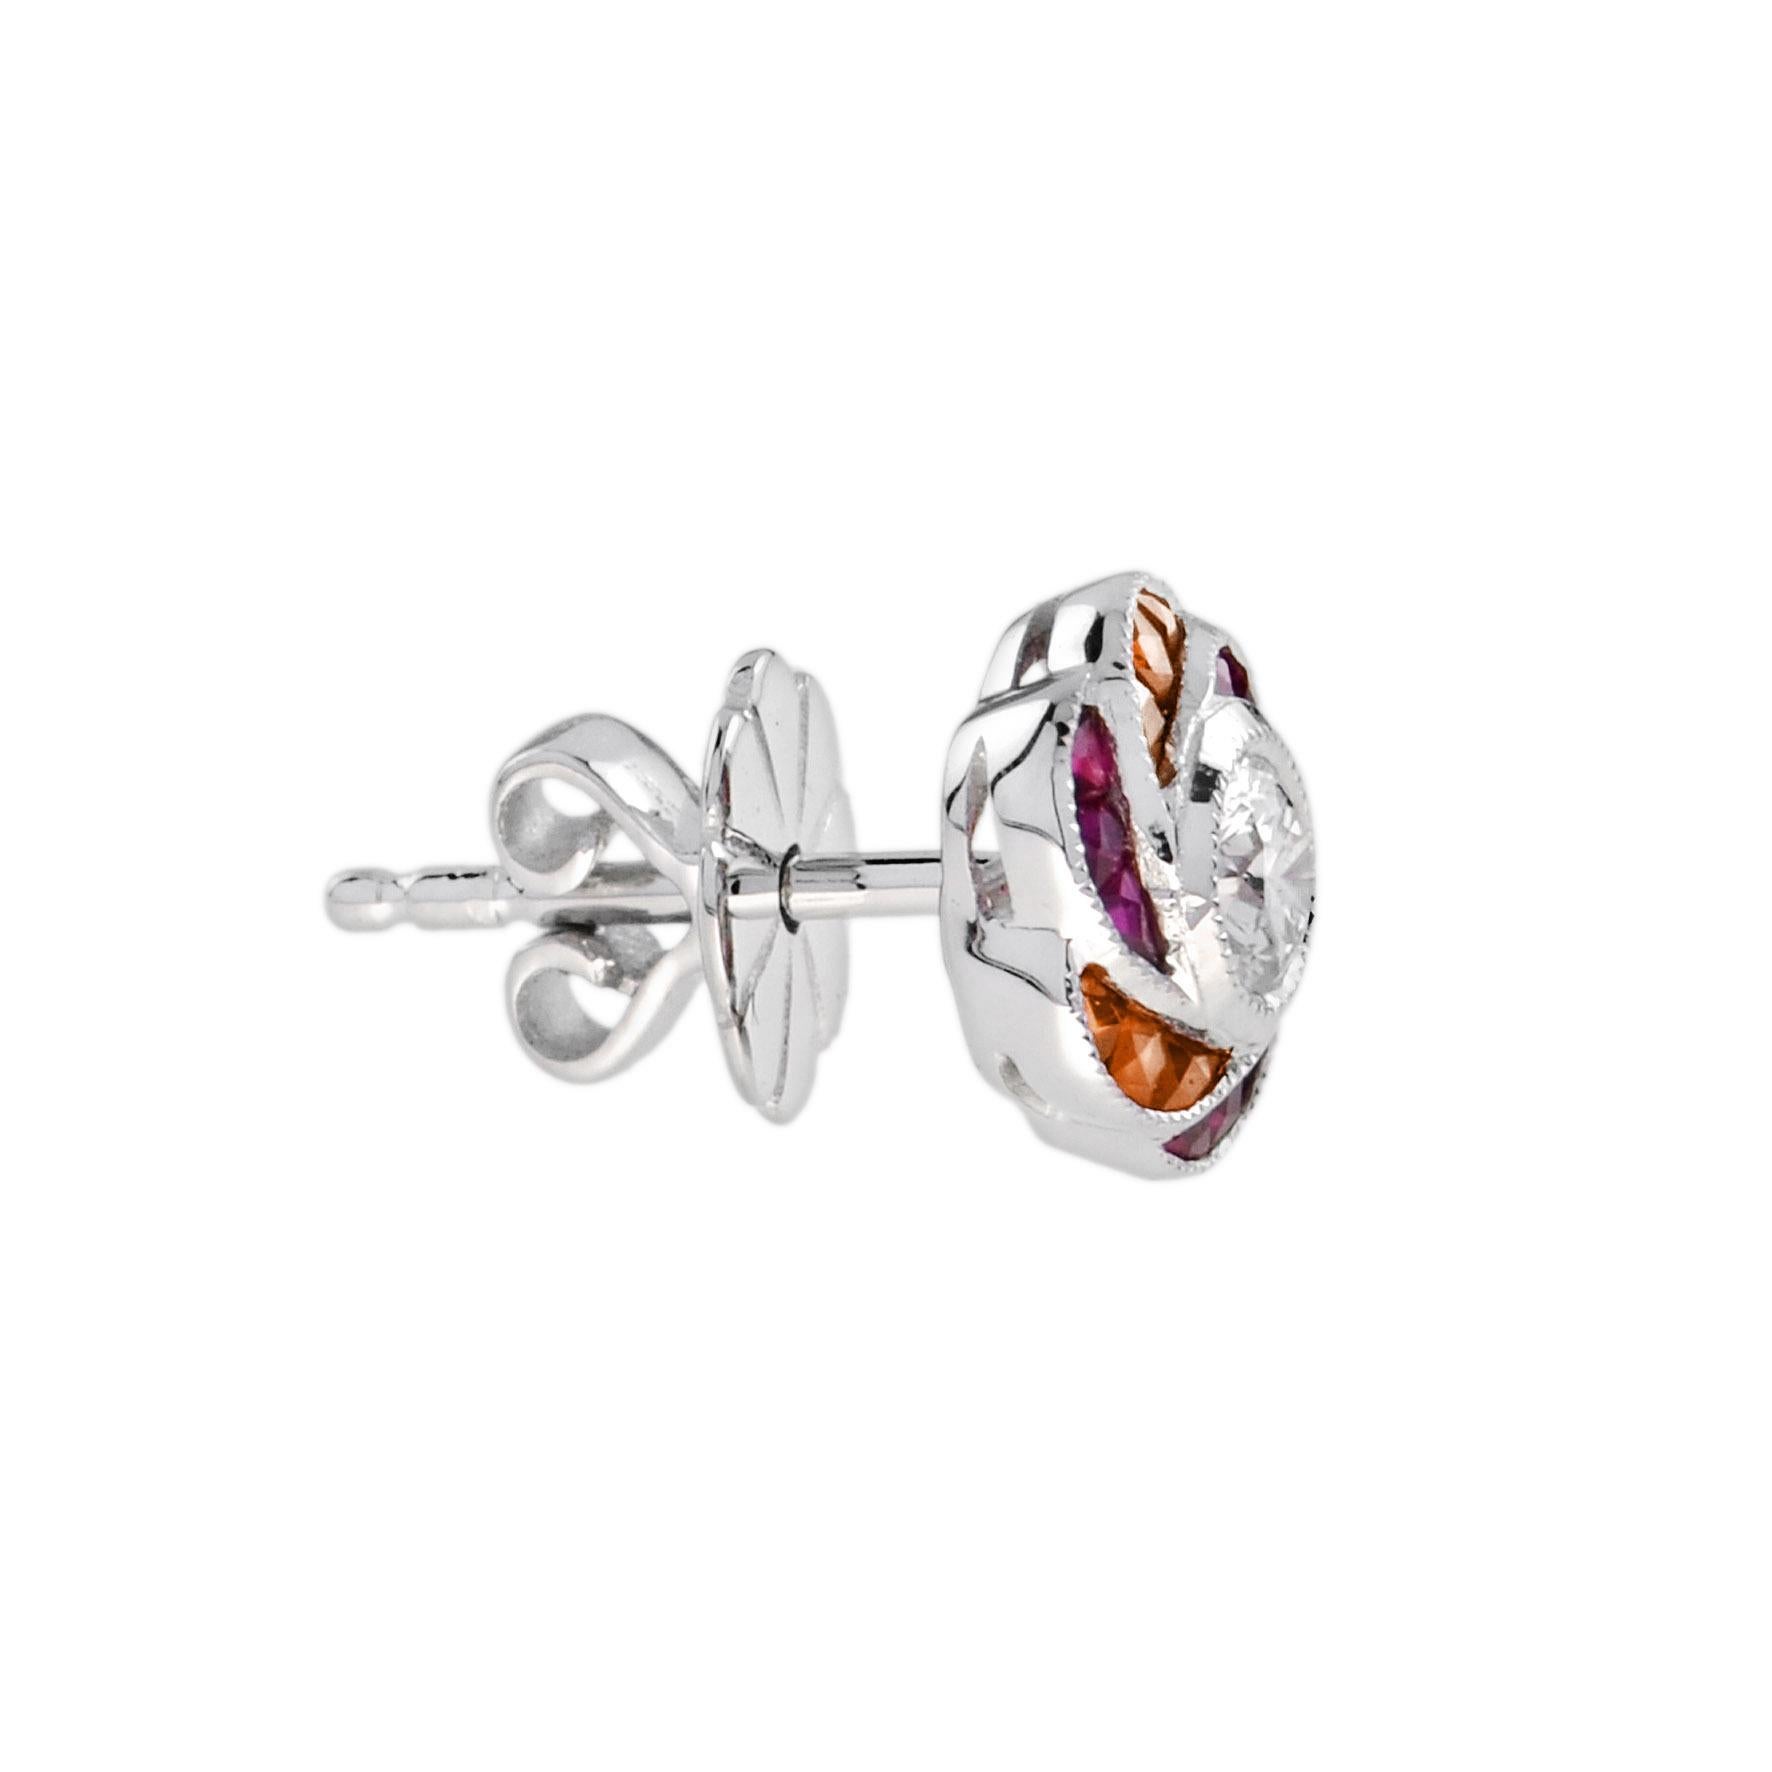 Perfect with everyday wear, these charming vintage Art Deco revivalist design stud earrings feature a pair of brilliant cut diamonds surrounded by ruby and vivid orange sapphire for rose petals finished look all in 18K white